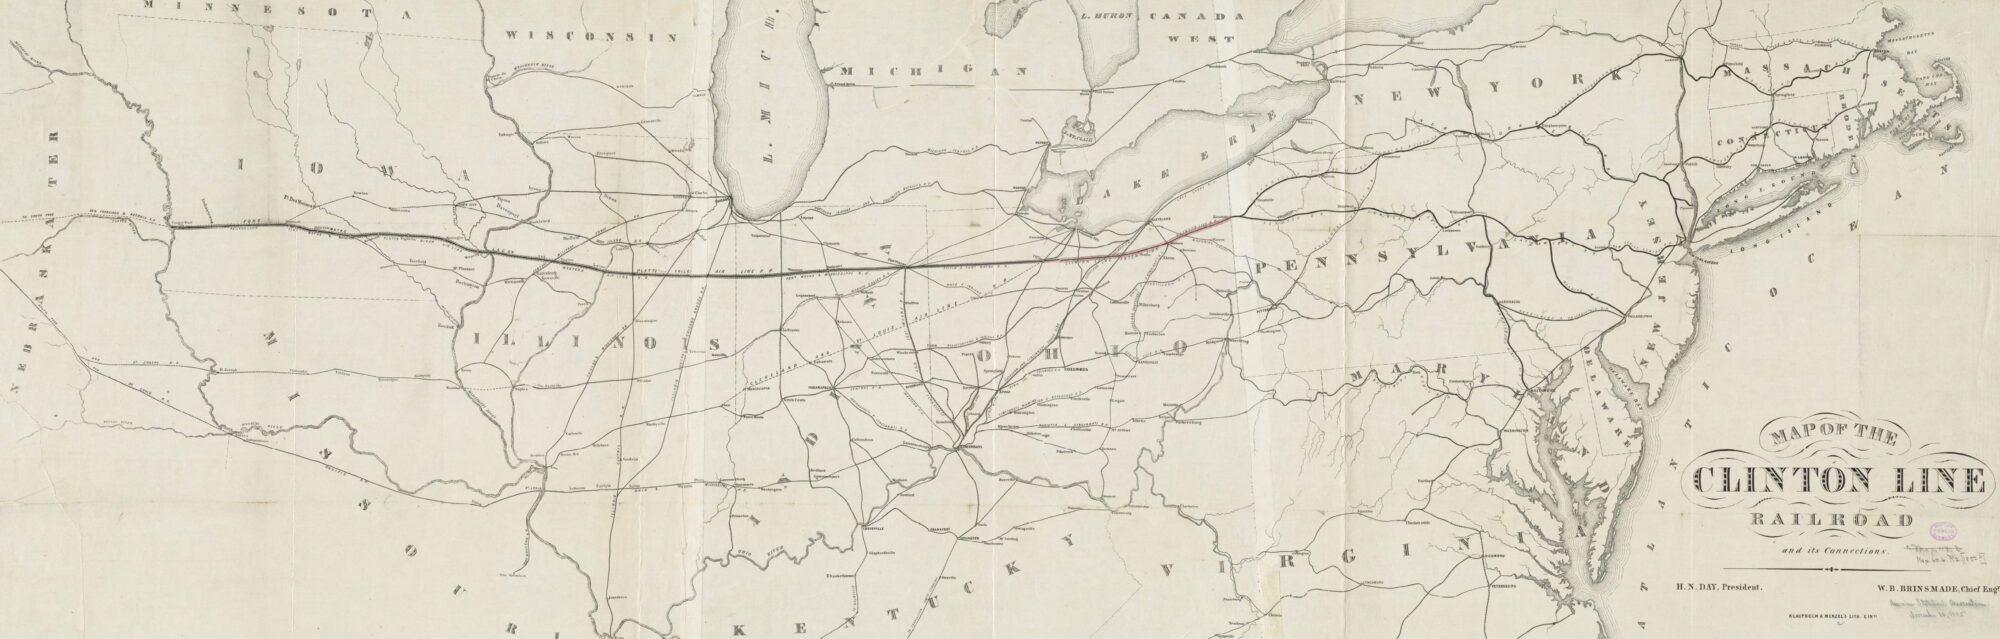 Map Of The Clinton Line Railroad And Its Connections1850–1859commonwealth Cj82kn75h Image Primary1